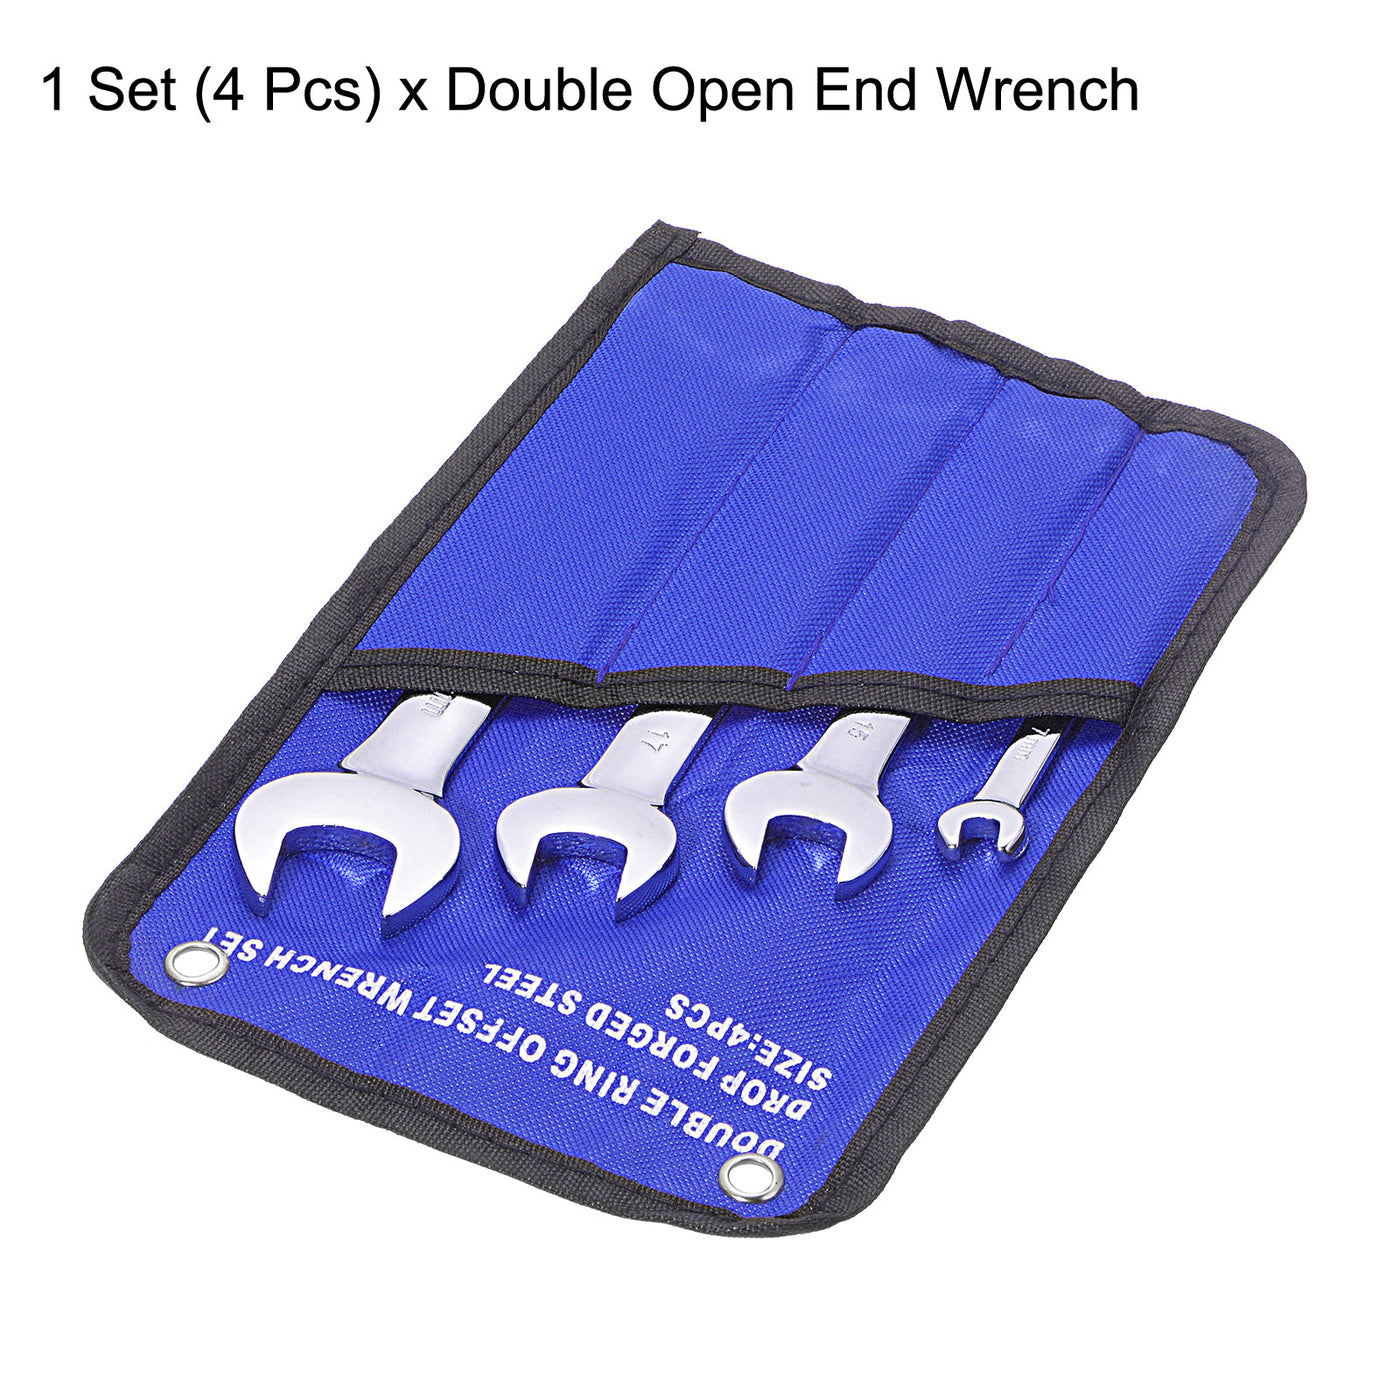 uxcell Uxcell Double Open-End Wrench Set, 5.5-22mm Metric CR-V with Rolling Pouch, 4-Piece